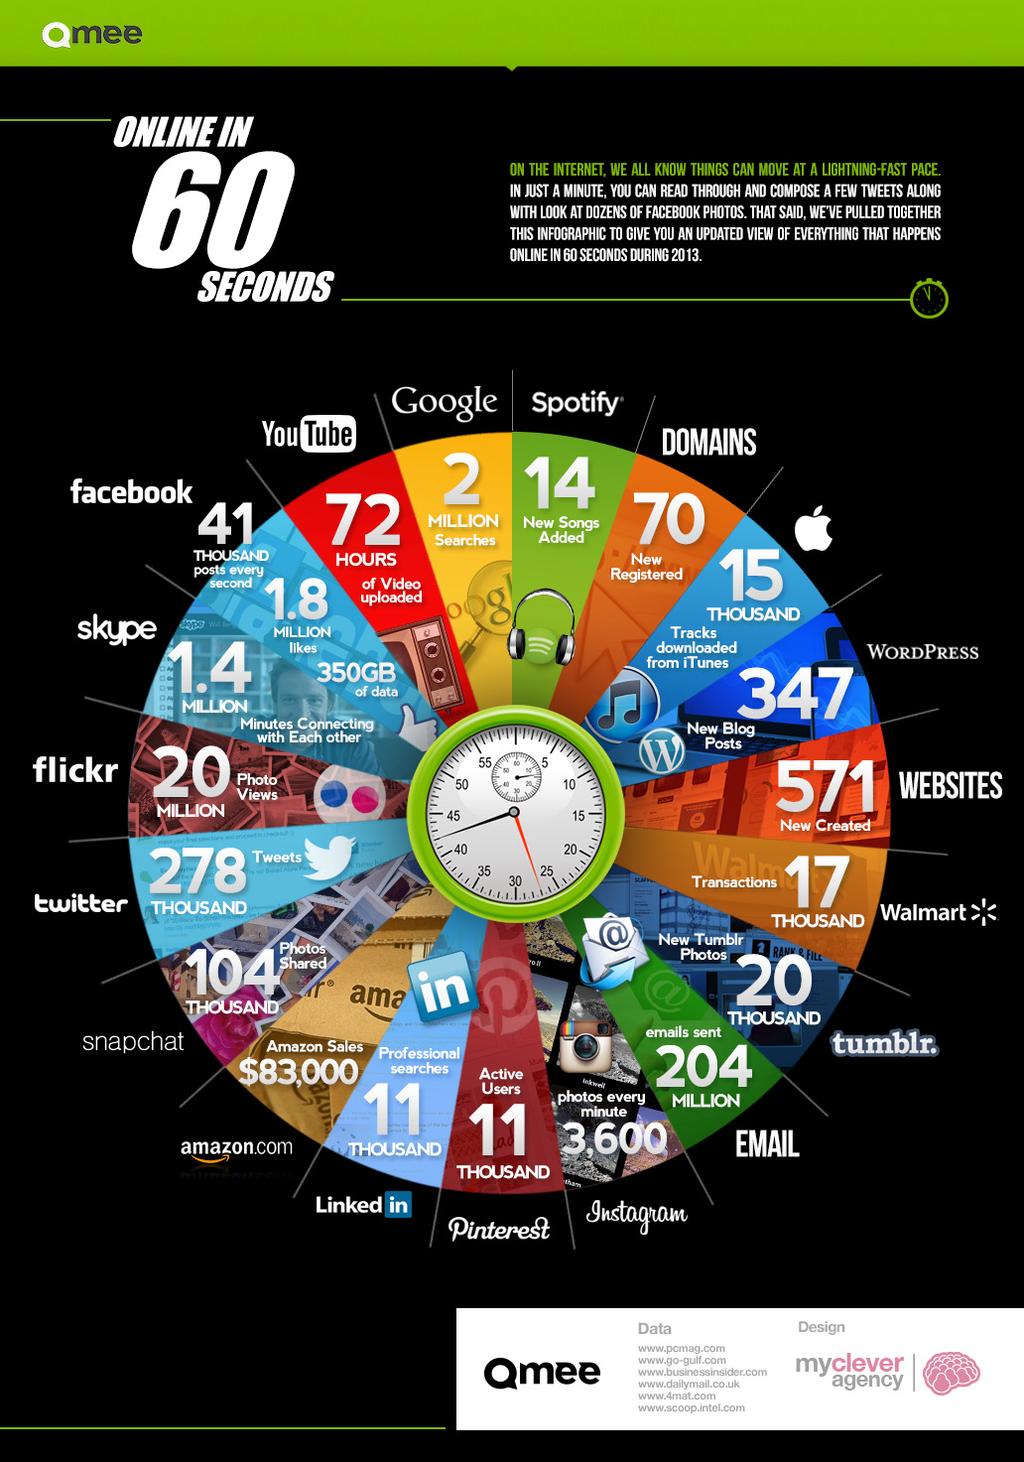 What Happens on the Internet in 60 seconds?